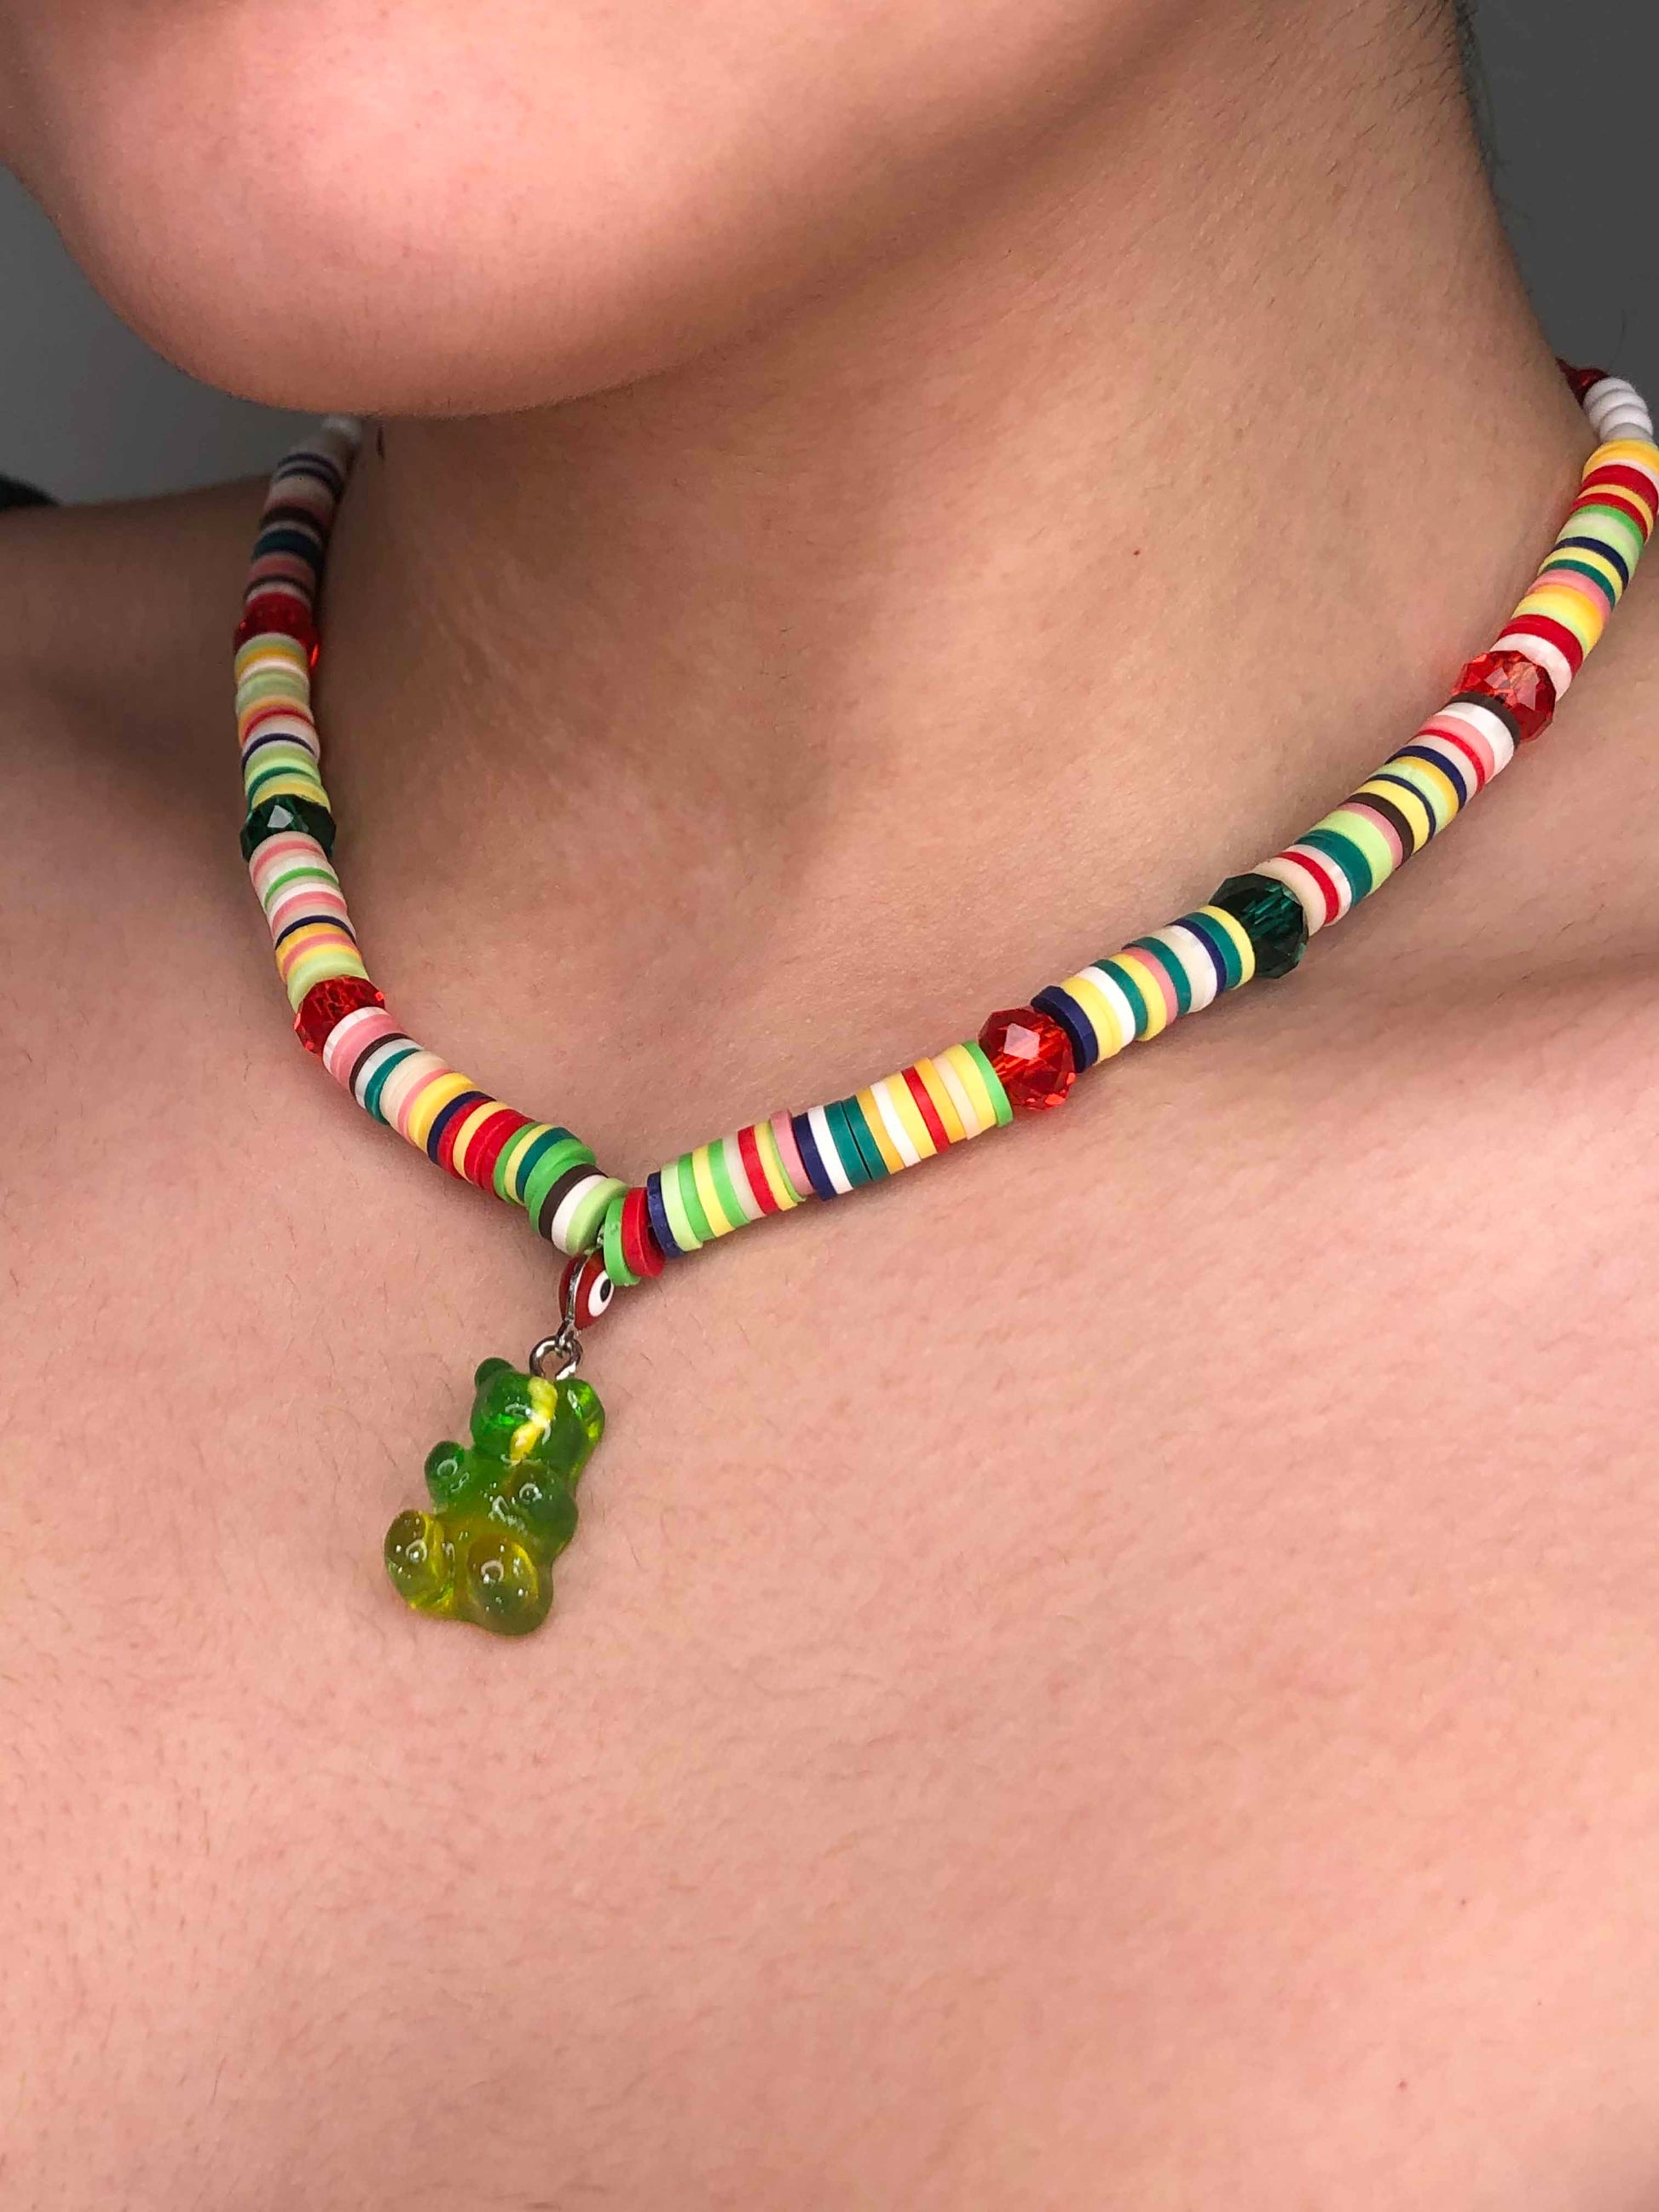 multicolored crystal and glass beaded necklace with a red evil eye, and green and yellow gummy bear-like charm